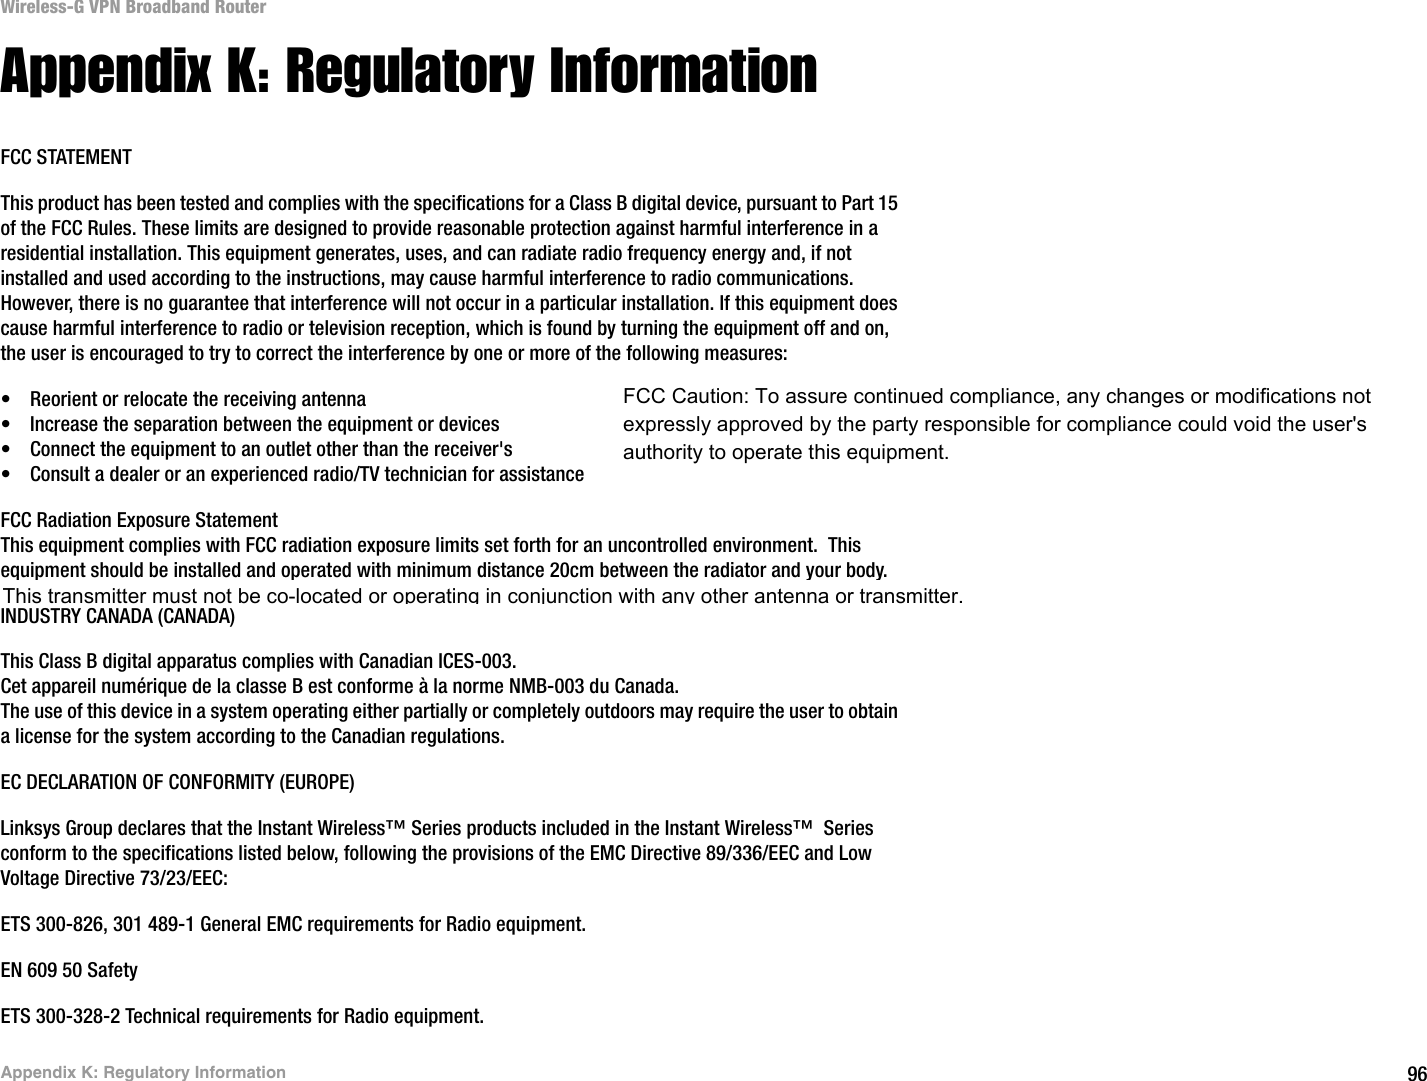 96Appendix K: Regulatory InformationWireless-G VPN Broadband RouterAppendix K: Regulatory InformationFCC STATEMENTThis product has been tested and complies with the specifications for a Class B digital device, pursuant to Part 15 of the FCC Rules. These limits are designed to provide reasonable protection against harmful interference in a residential installation. This equipment generates, uses, and can radiate radio frequency energy and, if not installed and used according to the instructions, may cause harmful interference to radio communications. However, there is no guarantee that interference will not occur in a particular installation. If this equipment does cause harmful interference to radio or television reception, which is found by turning the equipment off and on, the user is encouraged to try to correct the interference by one or more of the following measures:• Reorient or relocate the receiving antenna• Increase the separation between the equipment or devices• Connect the equipment to an outlet other than the receiver&apos;s• Consult a dealer or an experienced radio/TV technician for assistanceFCC Radiation Exposure StatementThis equipment complies with FCC radiation exposure limits set forth for an uncontrolled environment.  This equipment should be installed and operated with minimum distance 20cm between the radiator and your body.INDUSTRY CANADA (CANADA)This Class B digital apparatus complies with Canadian ICES-003.Cet appareil numérique de la classe B est conforme à la norme NMB-003 du Canada.The use of this device in a system operating either partially or completely outdoors may require the user to obtain a license for the system according to the Canadian regulations.EC DECLARATION OF CONFORMITY (EUROPE)Linksys Group declares that the Instant Wireless™ Series products included in the Instant Wireless™  Series conform to the specifications listed below, following the provisions of the EMC Directive 89/336/EEC and Low Voltage Directive 73/23/EEC:ETS 300-826, 301 489-1 General EMC requirements for Radio equipment.EN 609 50 SafetyETS 300-328-2 Technical requirements for Radio equipment.FCC Caution: To assure continued compliance, any changes or modifications not expressly approved by the party responsible for compliance could void the user&apos;s authority to operate this equipment.This transmitter must not be co-located or operating in conjunction with any other antenna or transmitter.